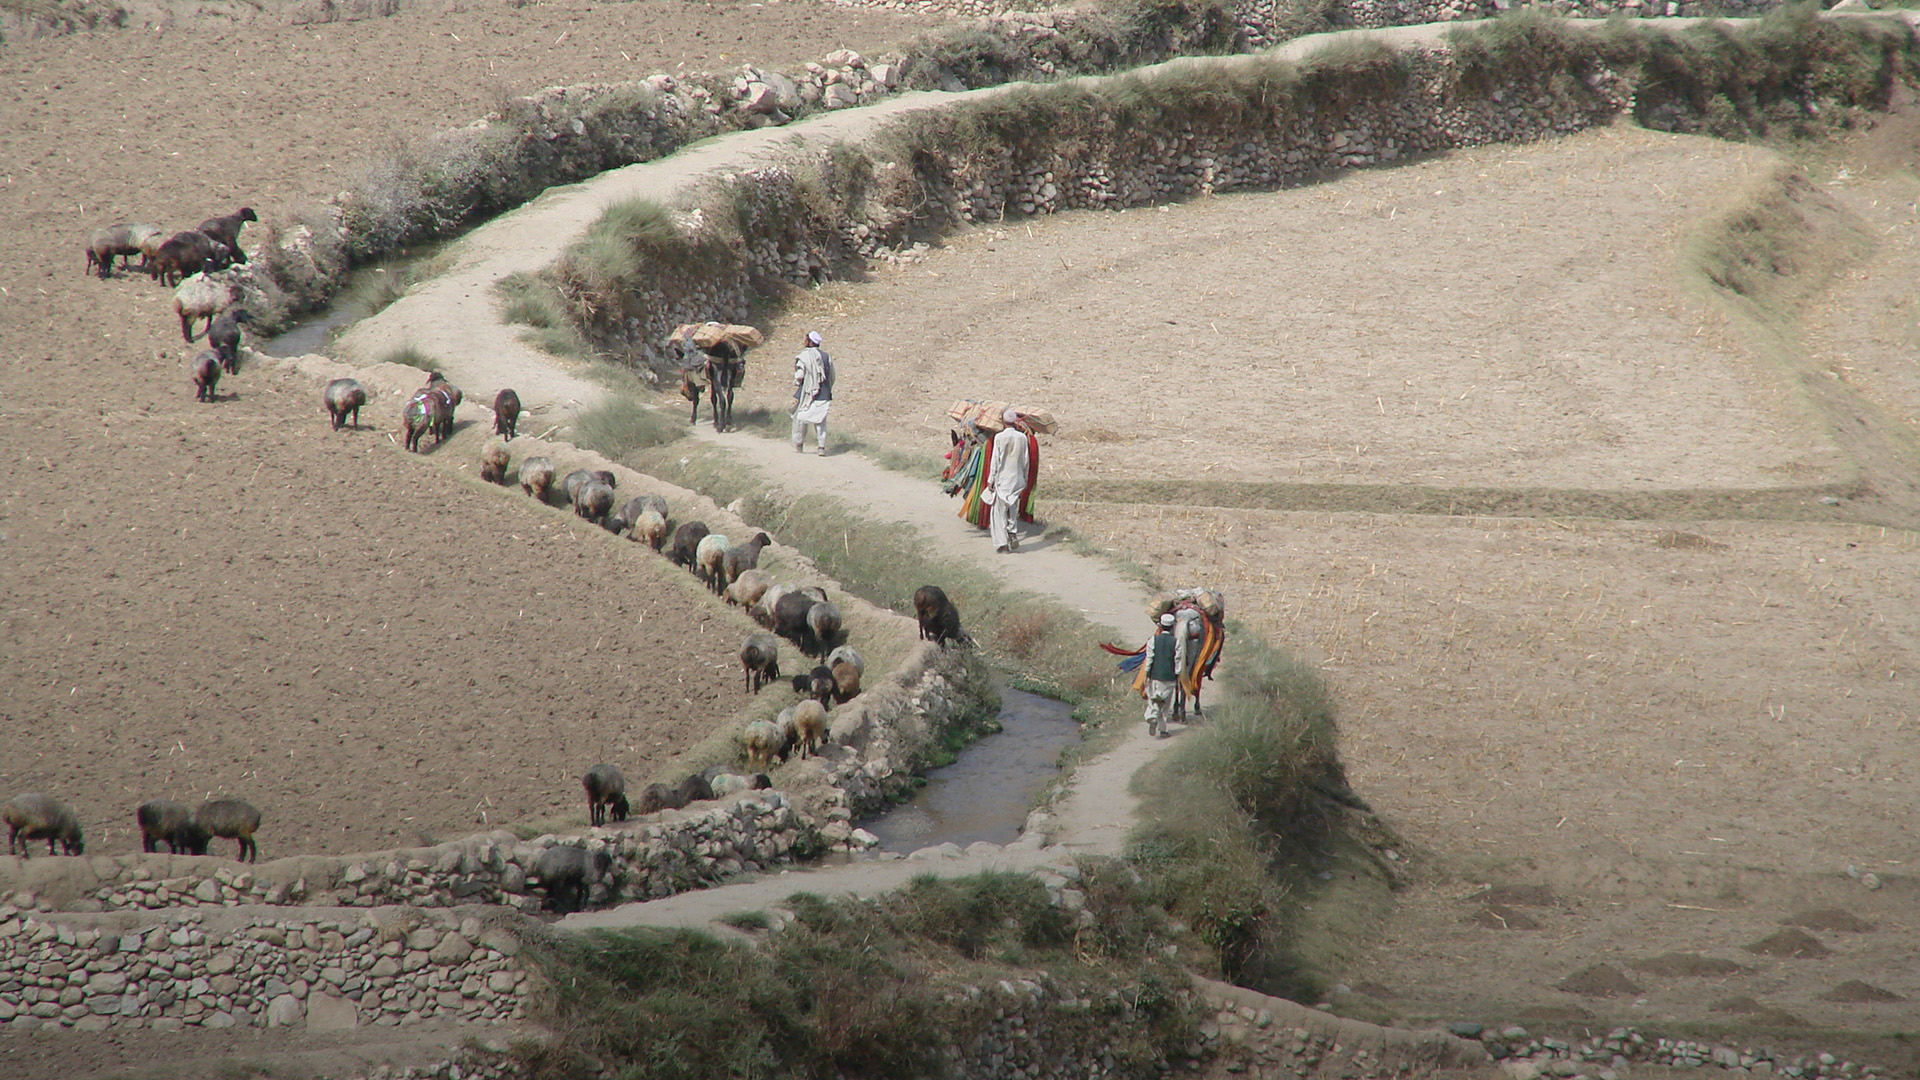 People working on a field in Afghanistan